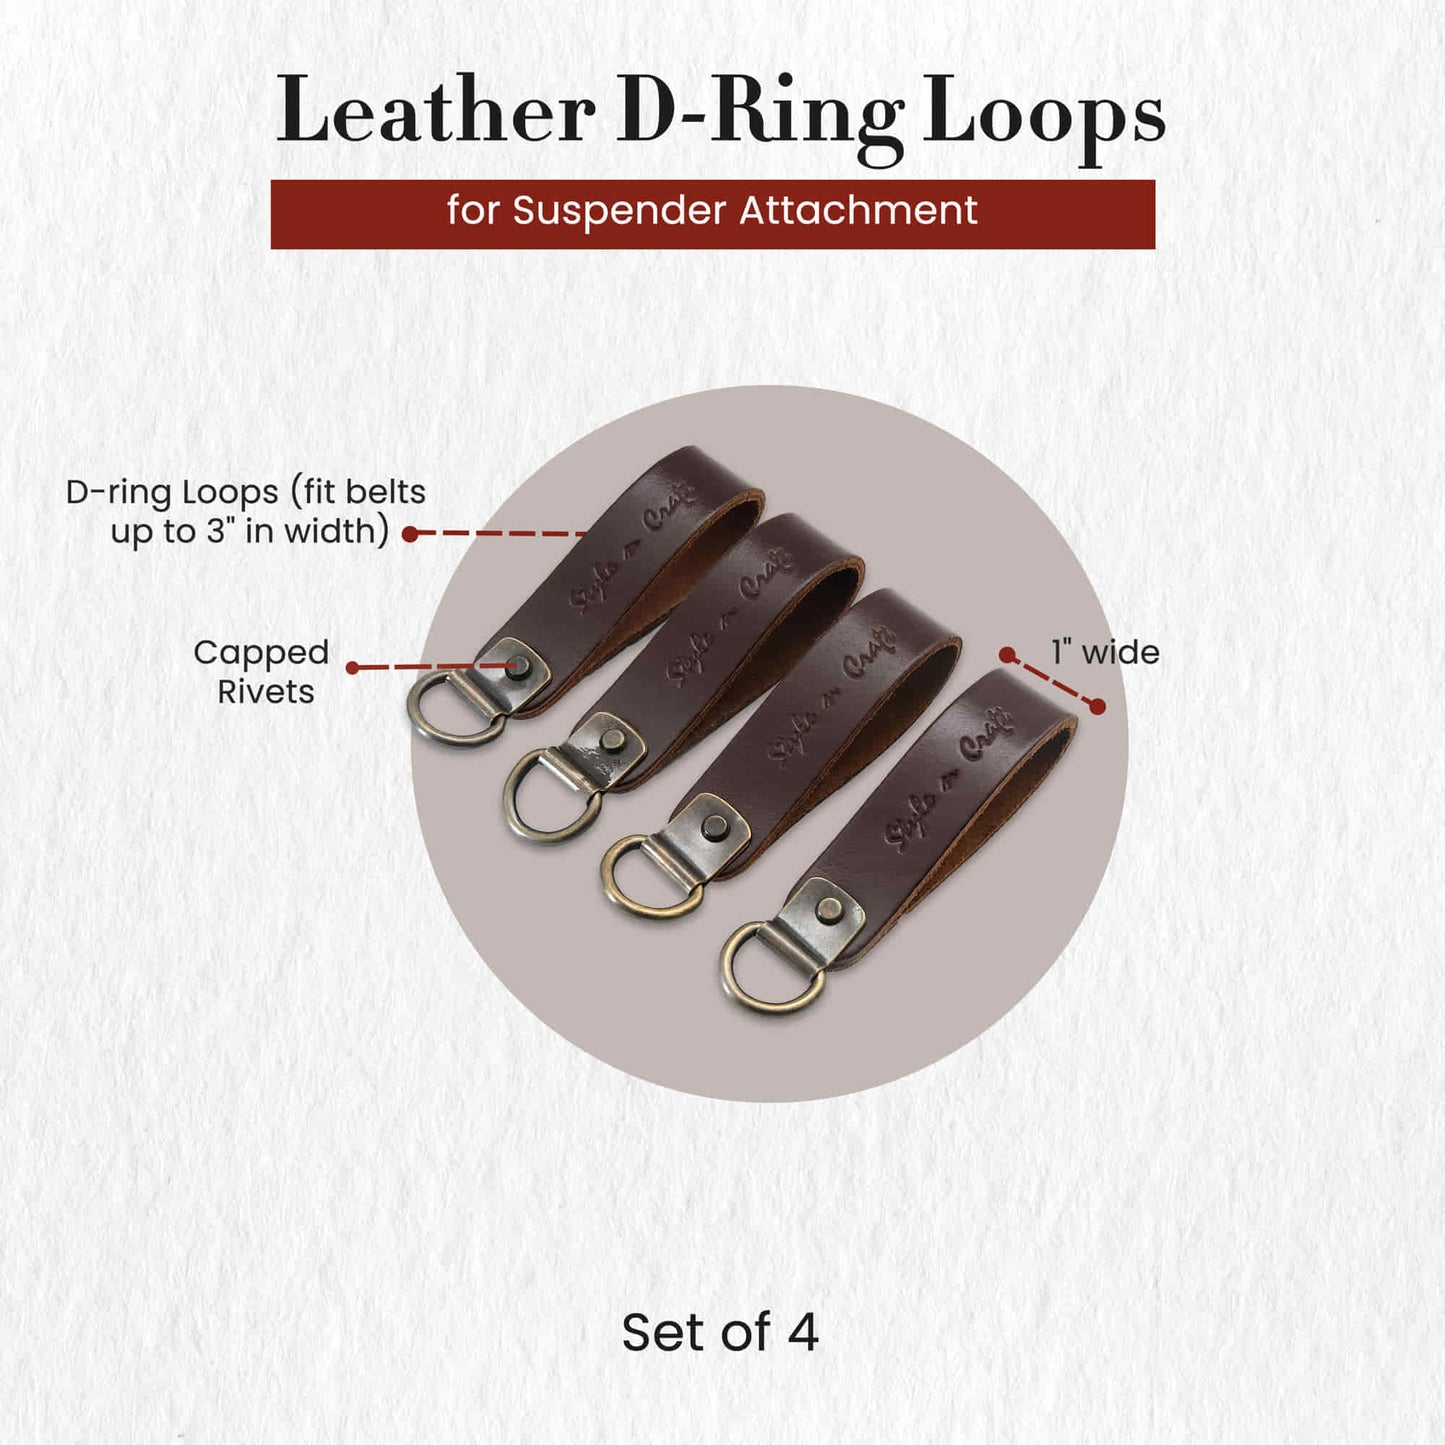 Style n Craft 98200 - Leather D-Ring Loop Set (4 Pcs) for Suspender Attachment in Dark Tan Color - Front Angled View Showing the Details.